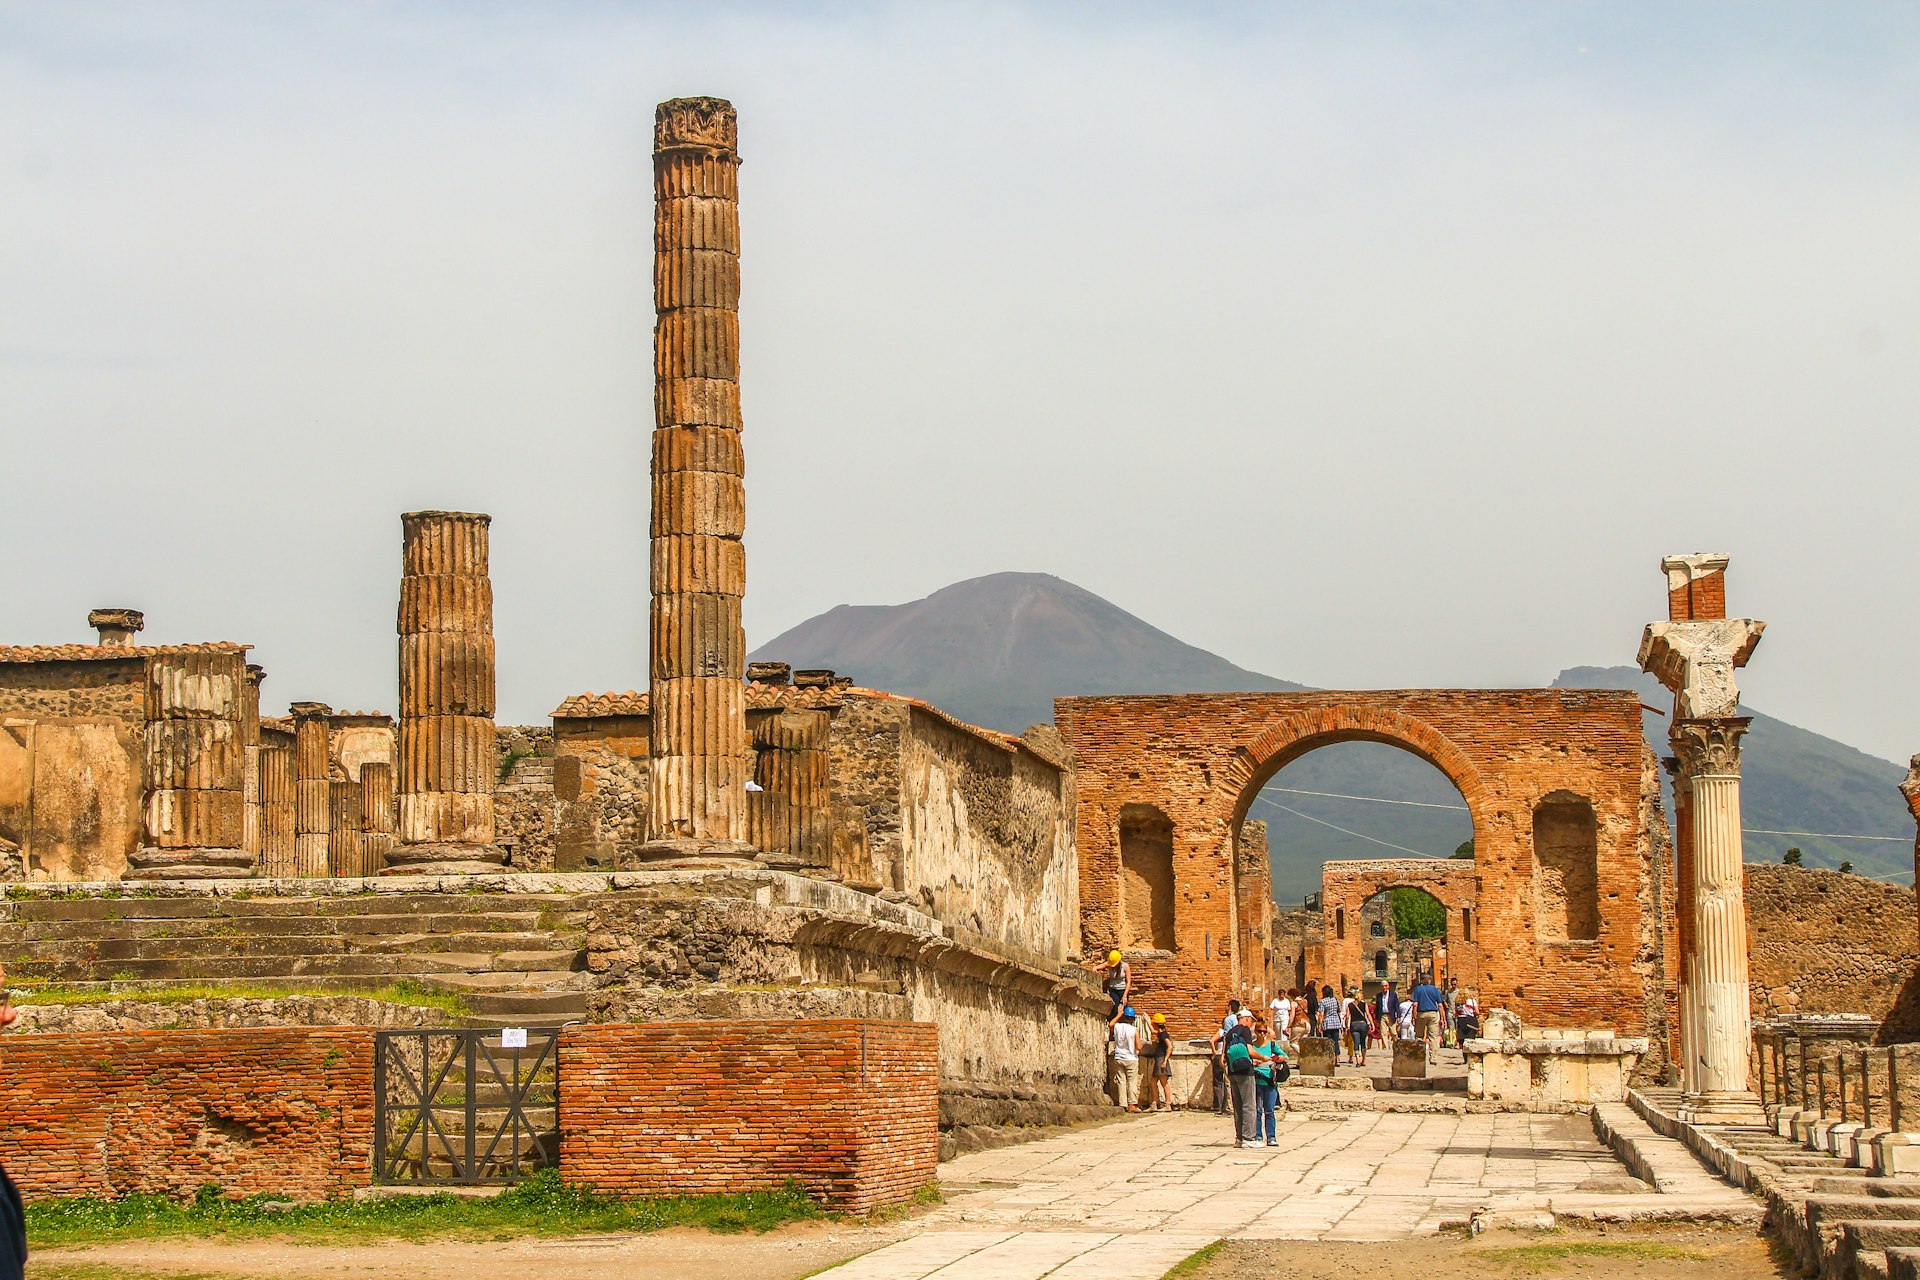 The ruined city of Pompeii. People walk around the ruins of the former city, which was destroyed by Mt Vesuvius. The volcano is visible in the background of the image. 